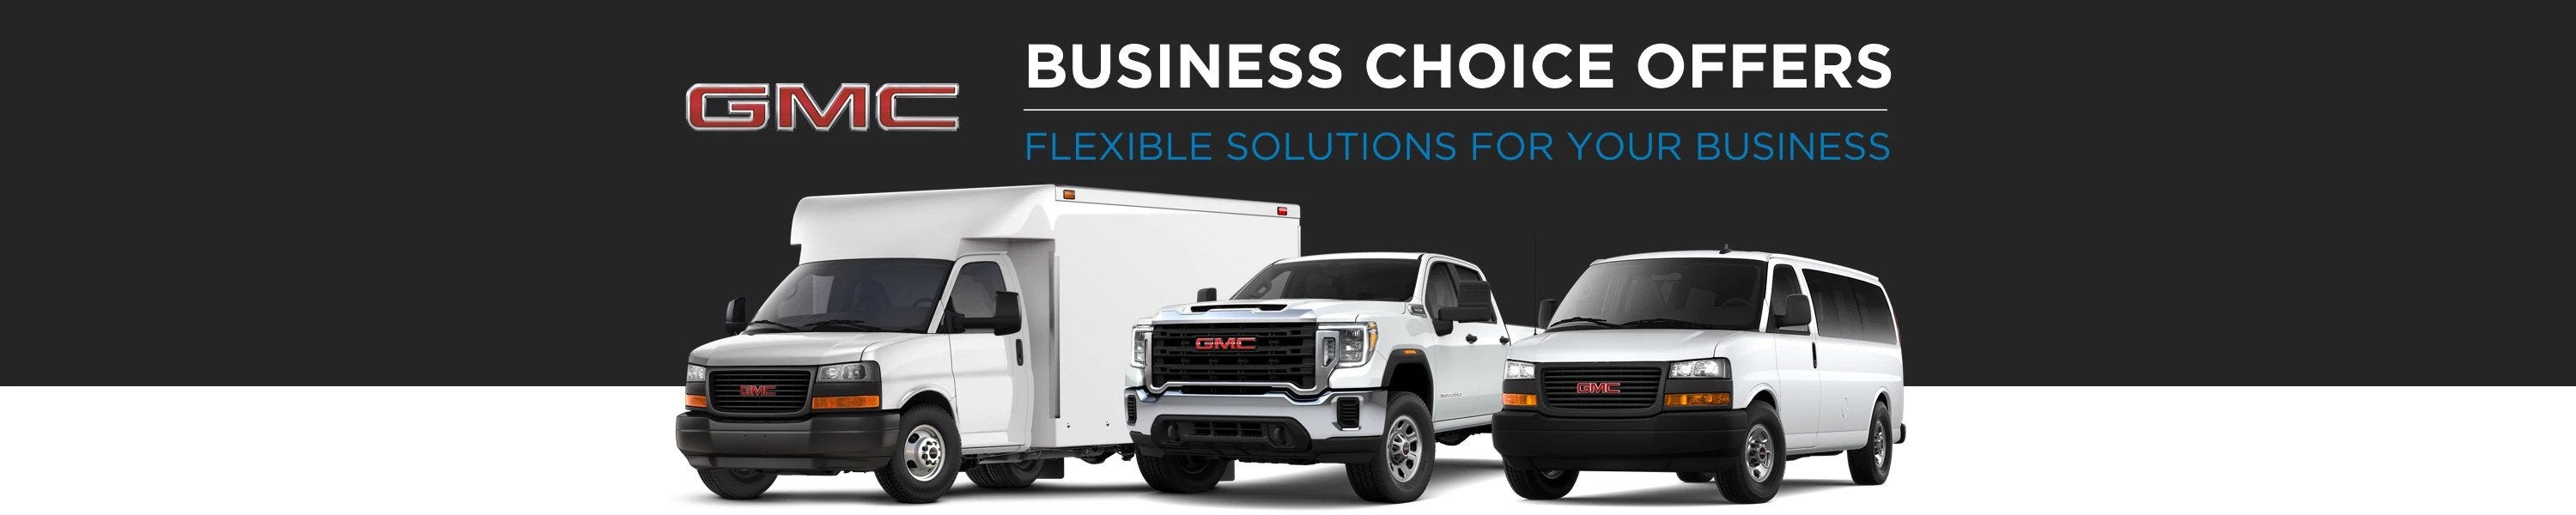 GMC Business Choice Offers - Flexible Solutions for your Business - Lynch Chevrolet GMC of Burlington in Burlington WI